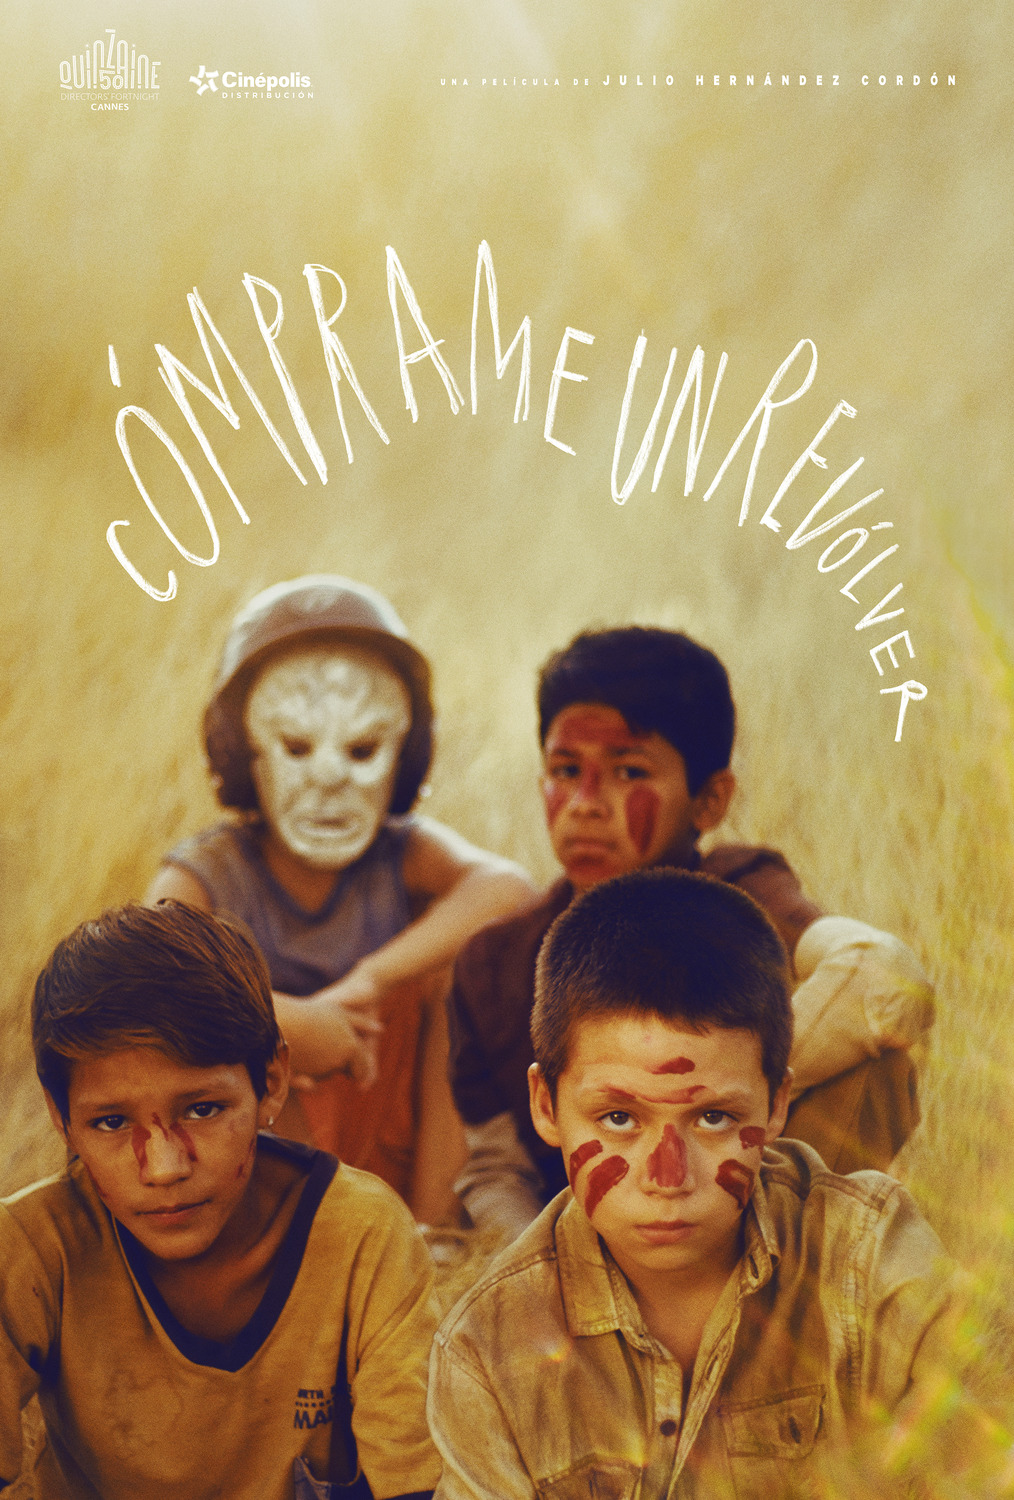 Extra Large Movie Poster Image for Cómprame un revolver (#1 of 4)